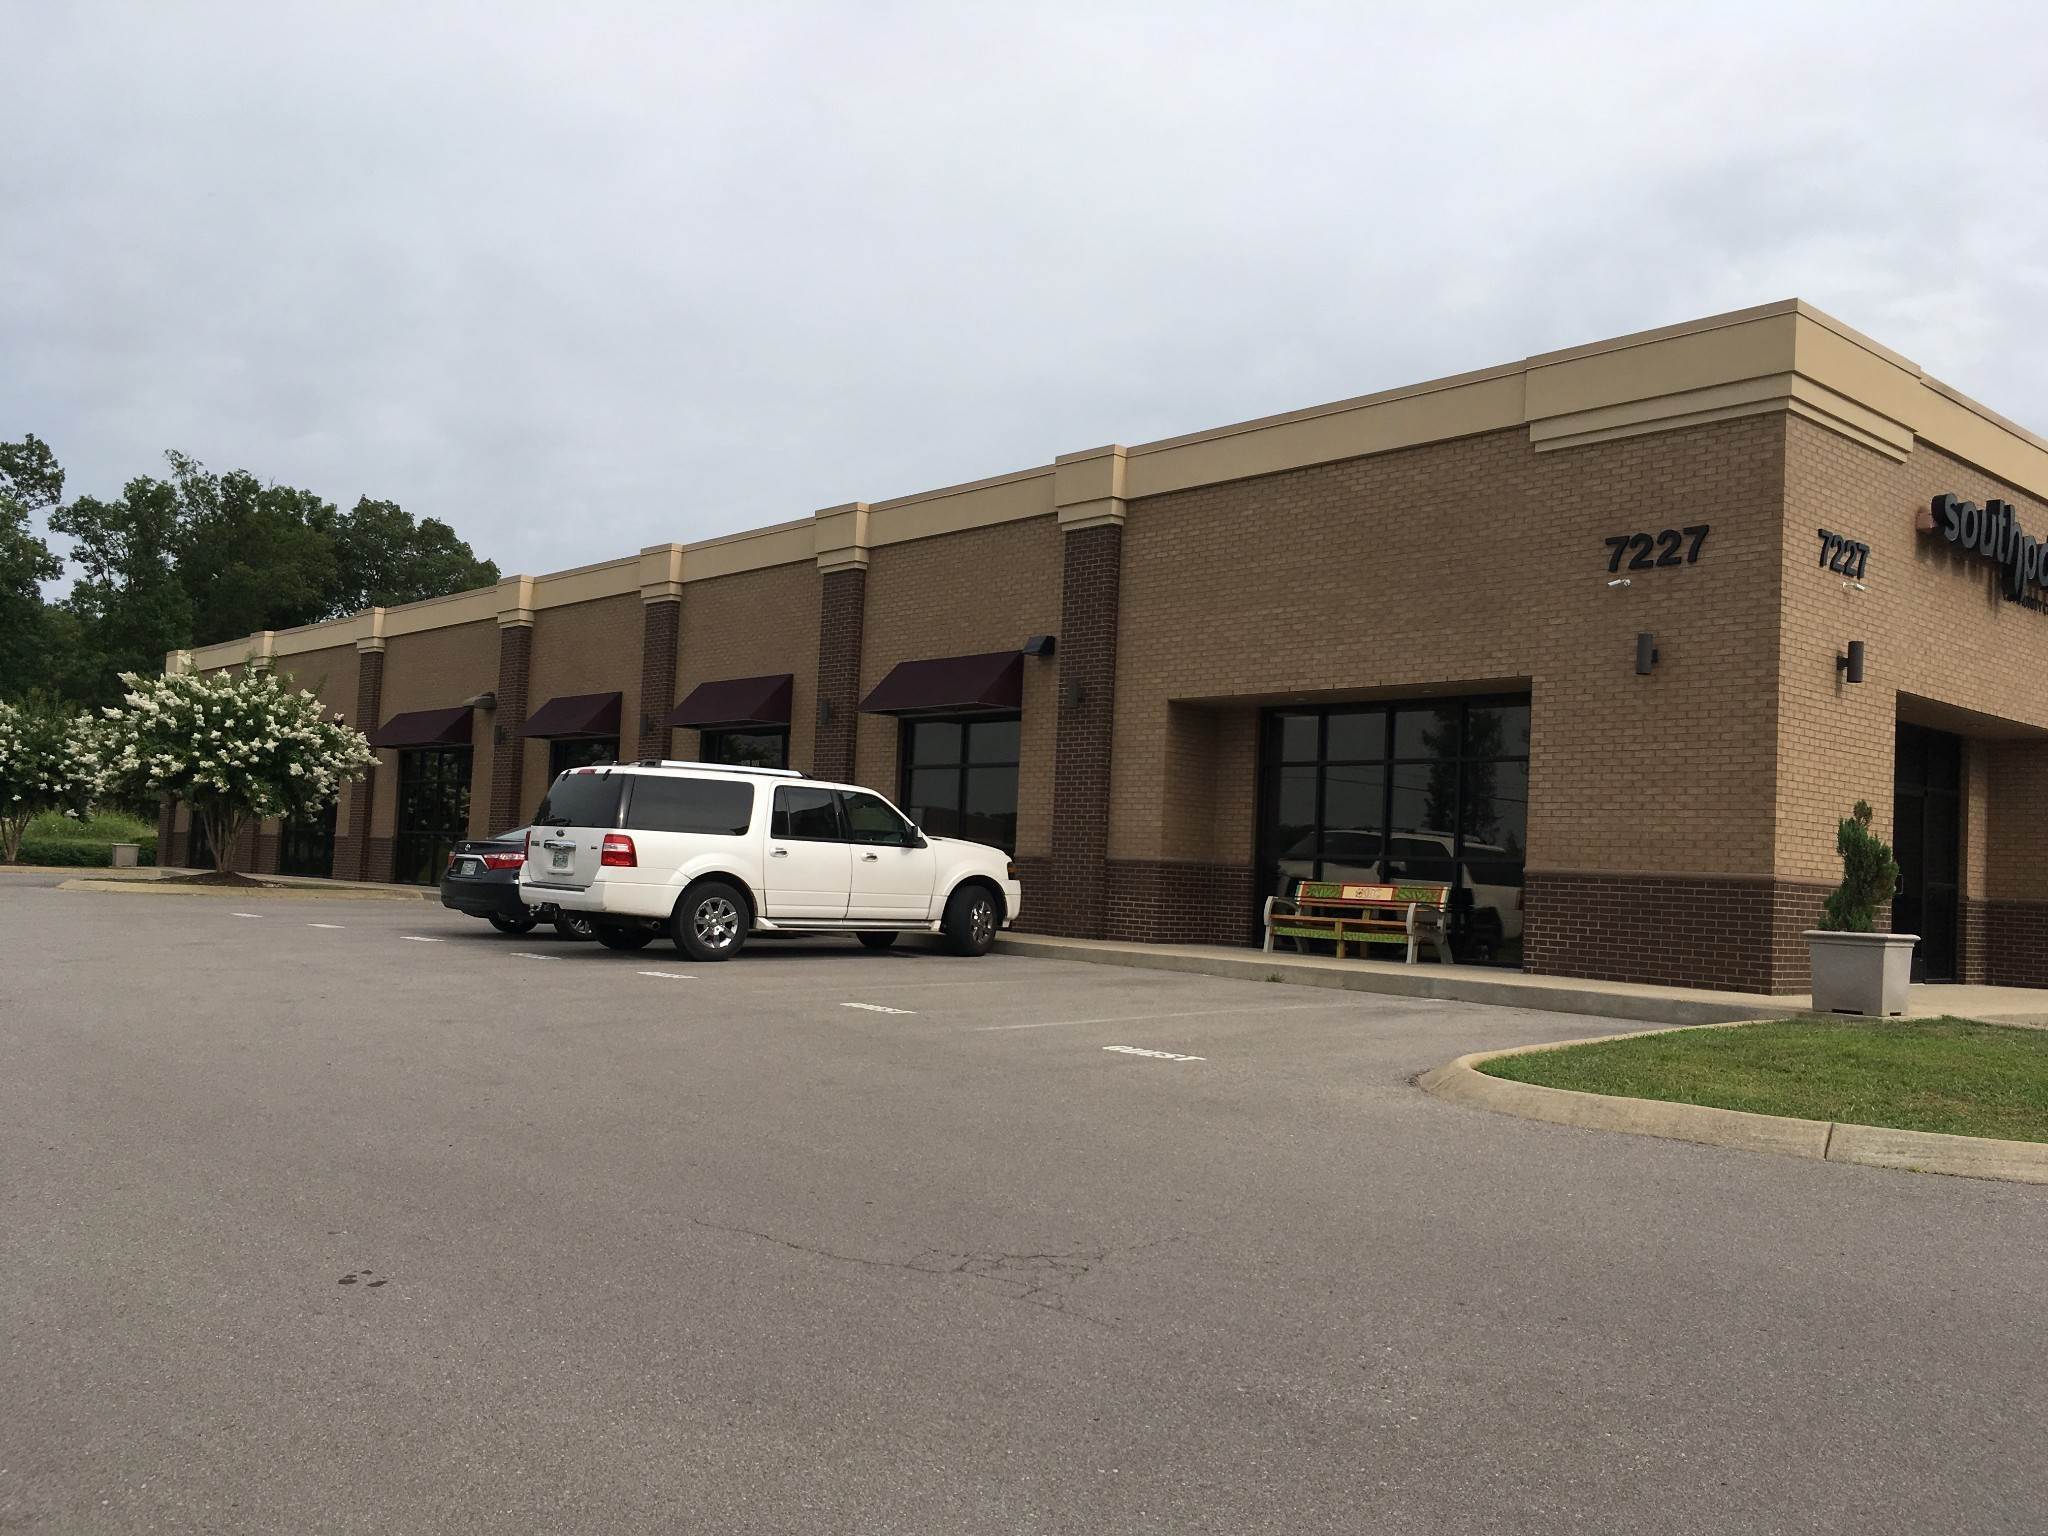 Property for Sale at 7227 Haley Industrial Drive Nolensville, Tennessee 37135 United States